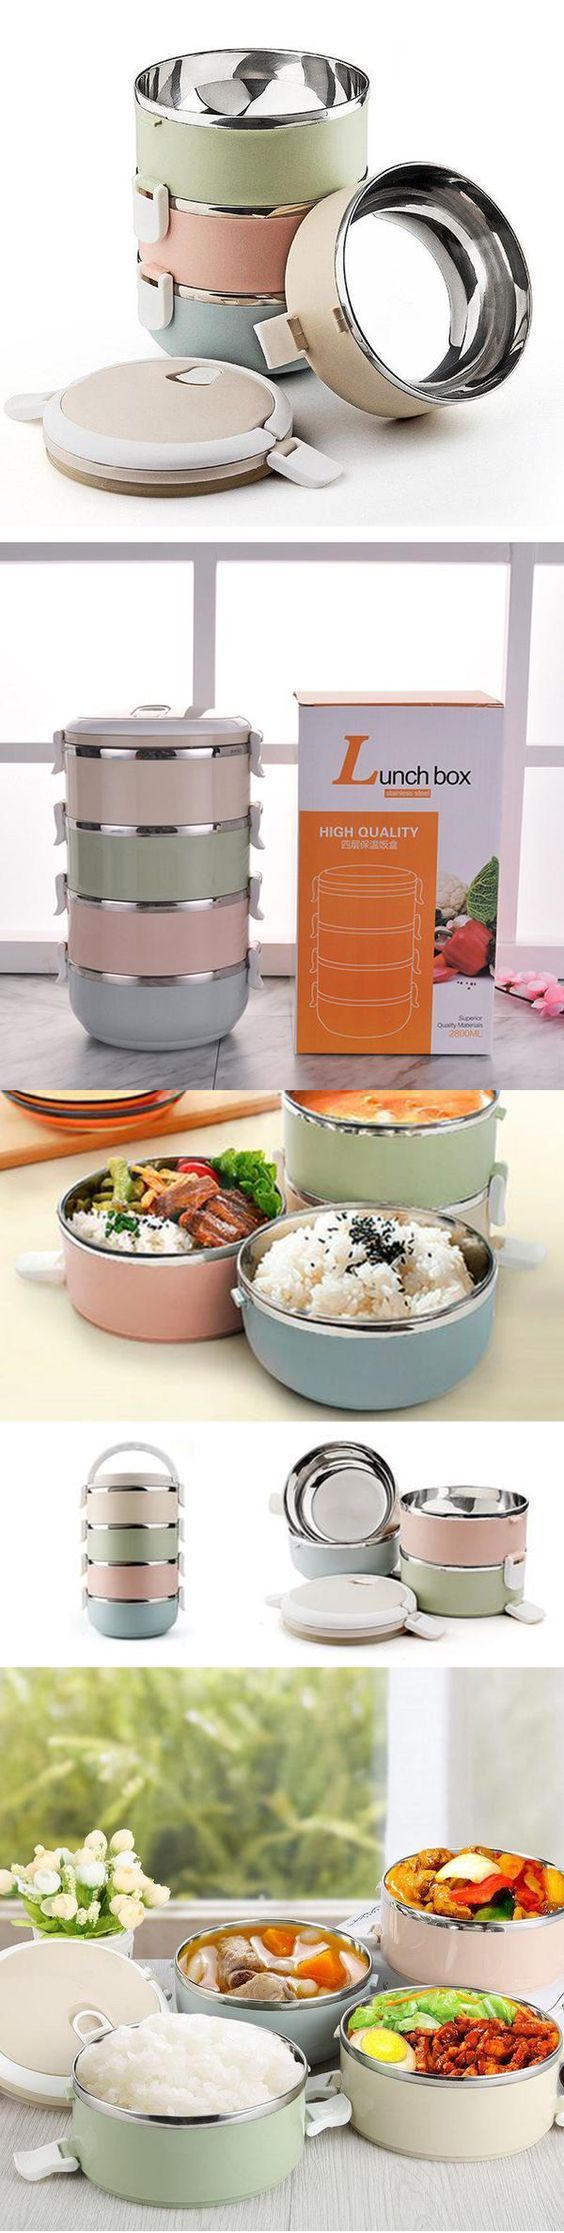 1000+ SOLD Lunch Box Bento Food Storage Container.1/2/3/4 Layers&Stainless Steel.SHOP NOW! -   18 recetas fitness
 ideas